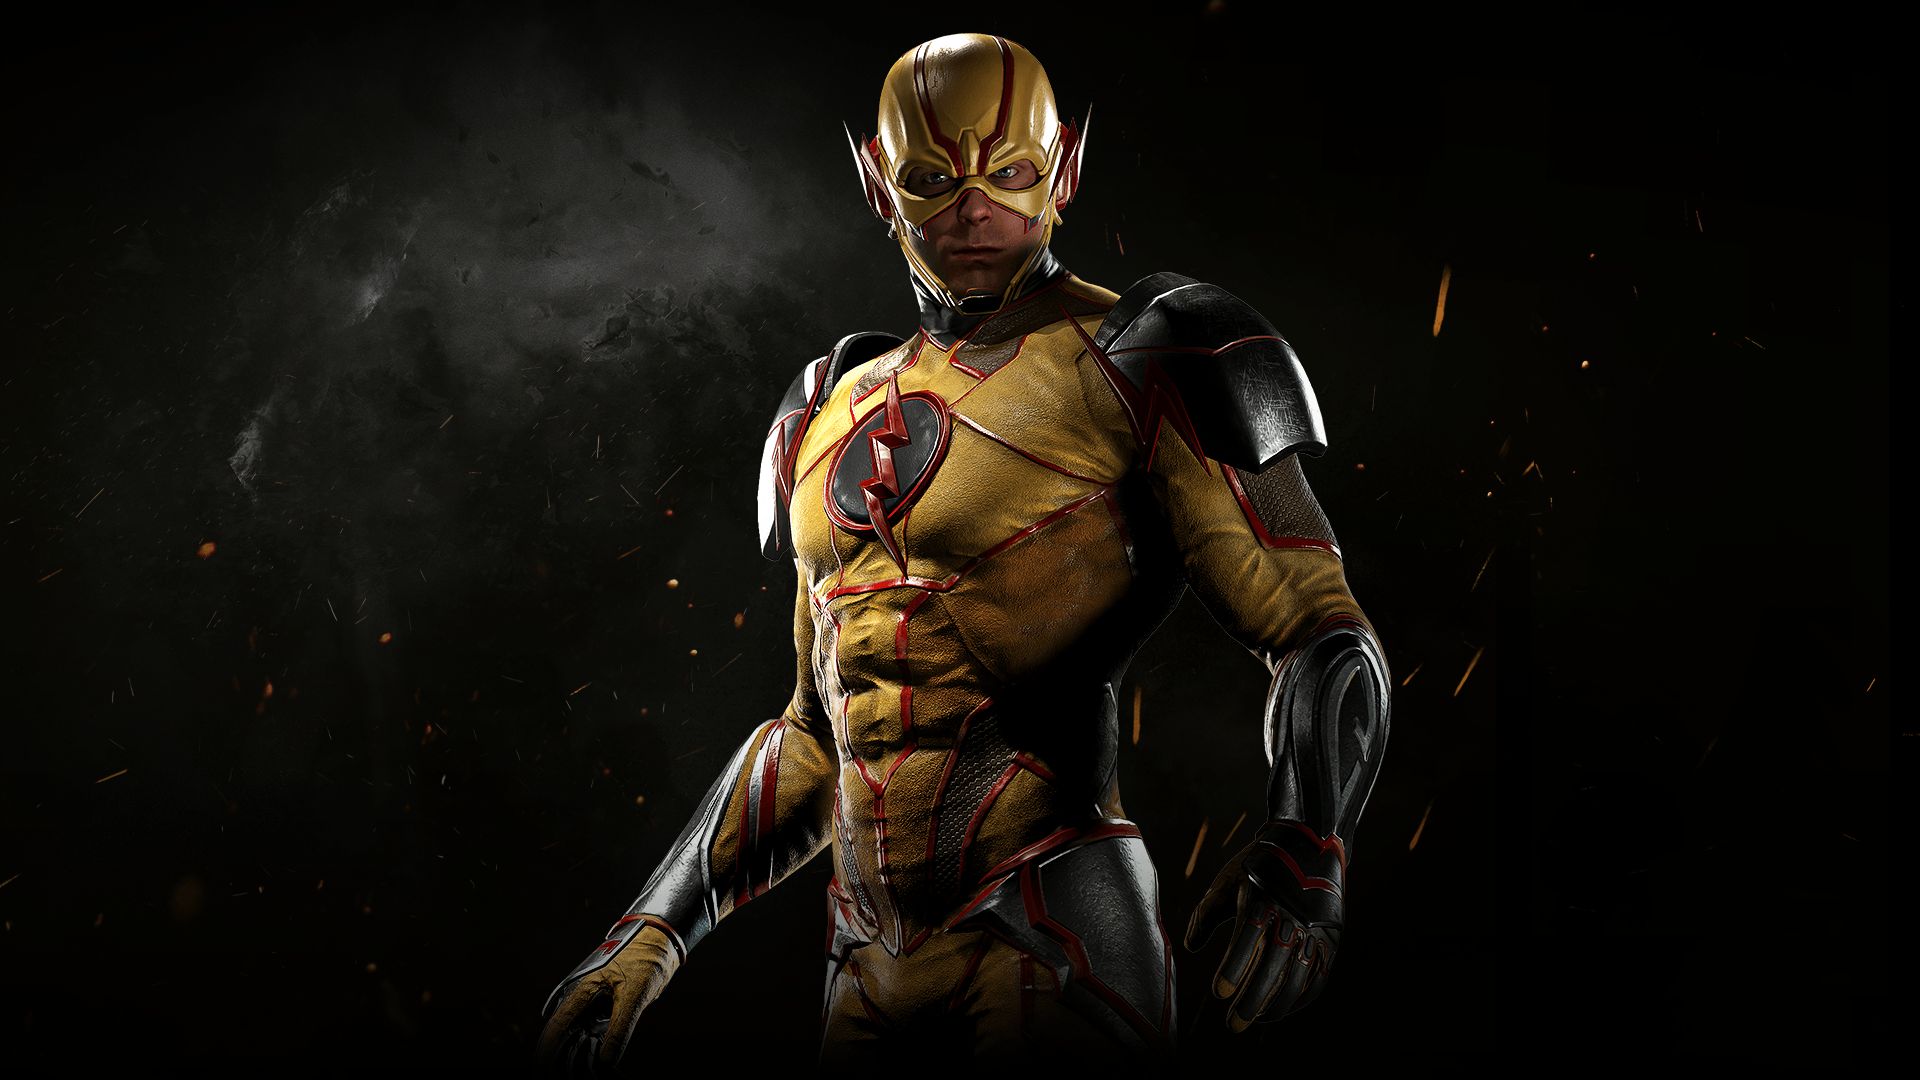 reverse flash, injustice 2, video game, injustice Full HD